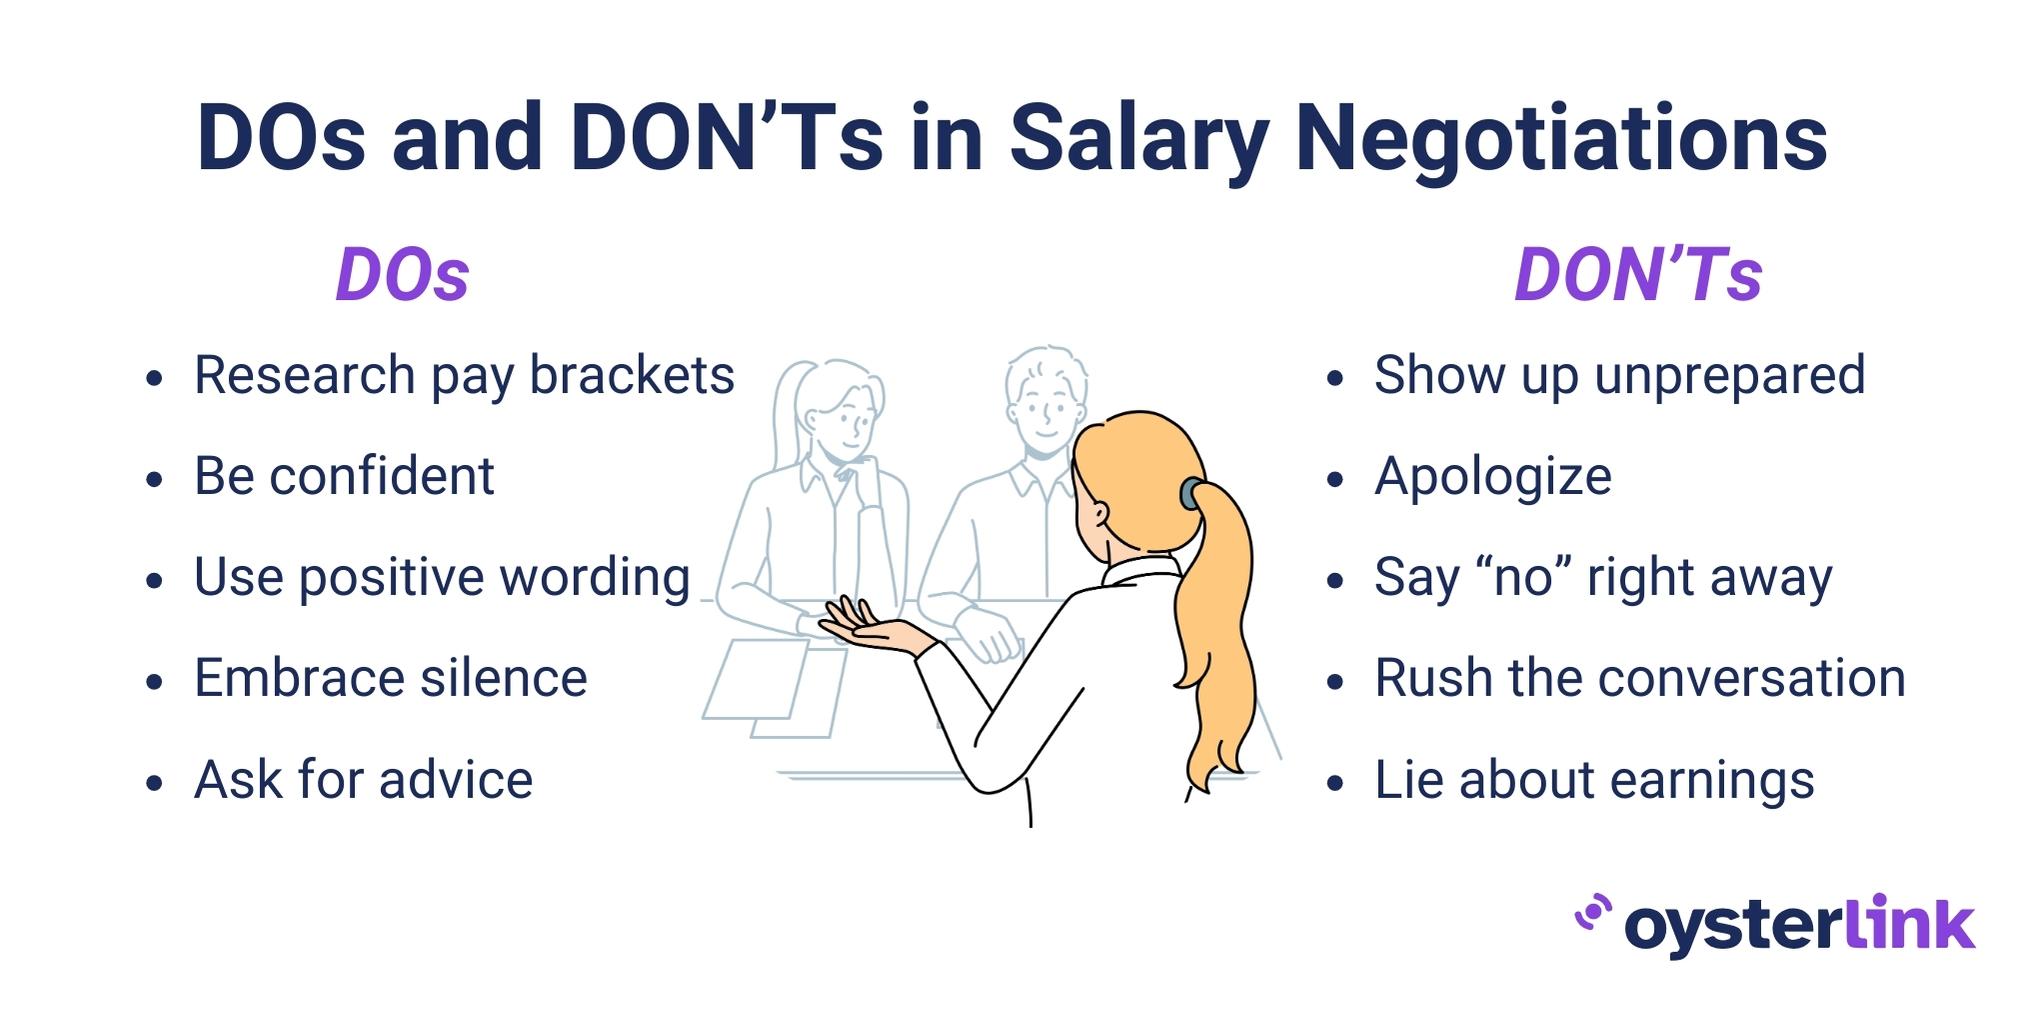 A graphic explaining the dos and don'ts in salary negotiations